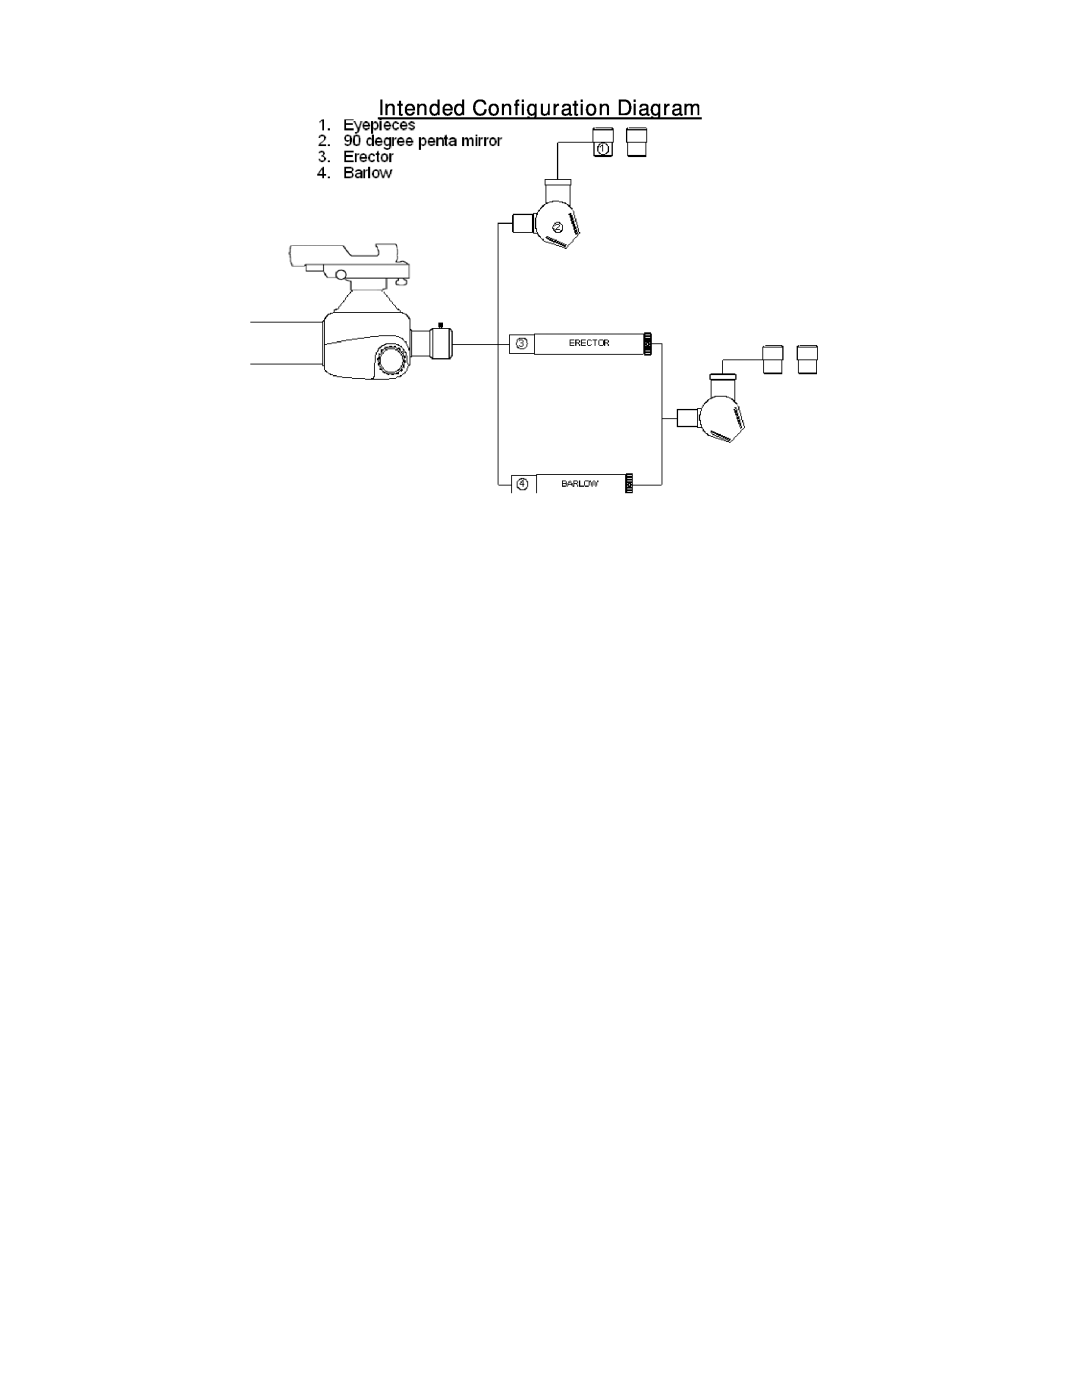 Bushnell 78-9440 manual Intended Configuration Diagram 